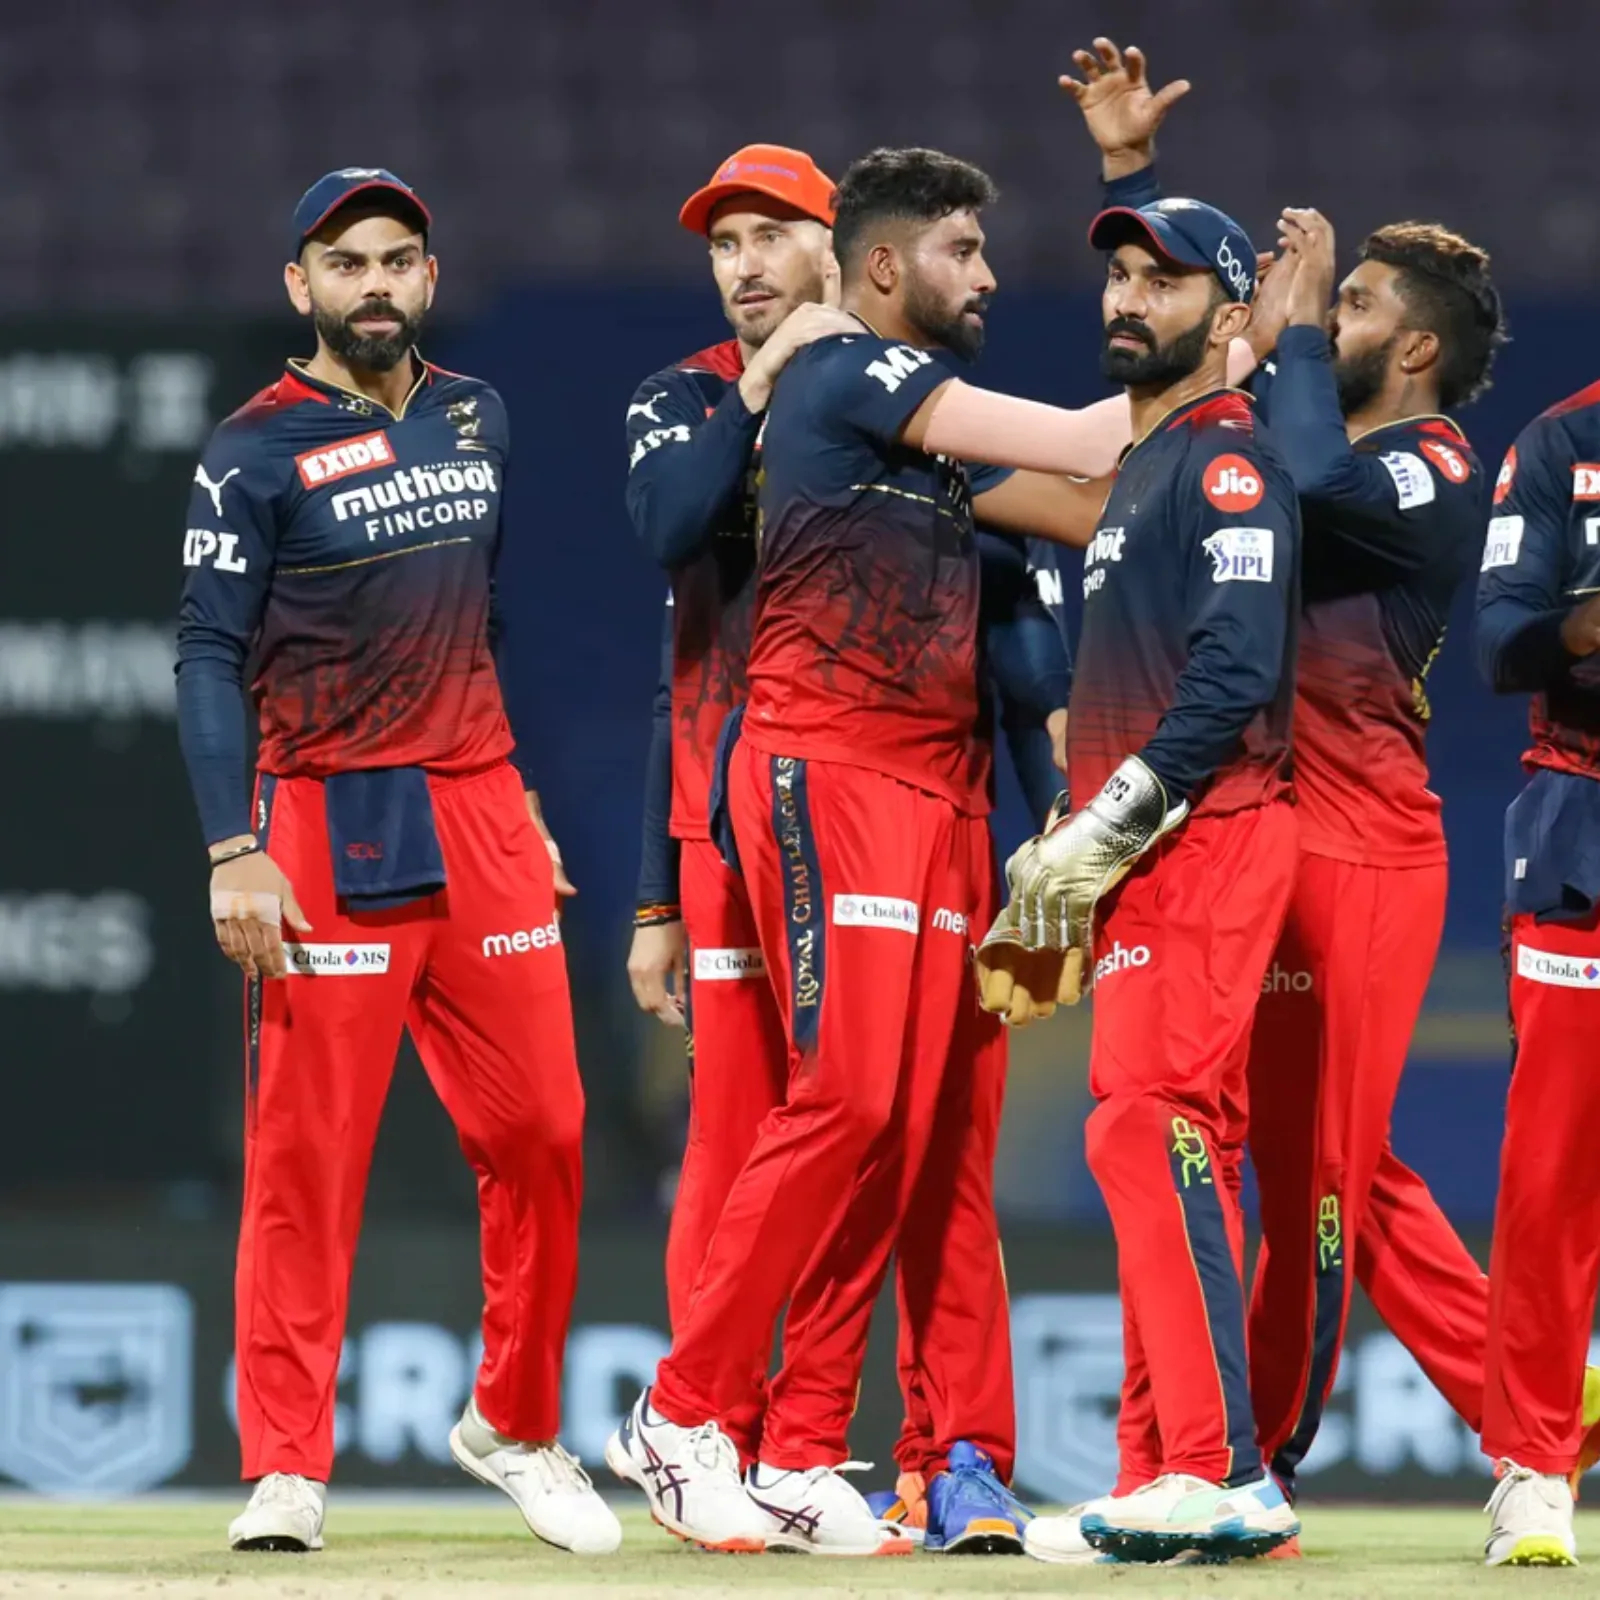 Vettori picked RCB as one of the four teams that may make it into playoffs | BCCI-IPL